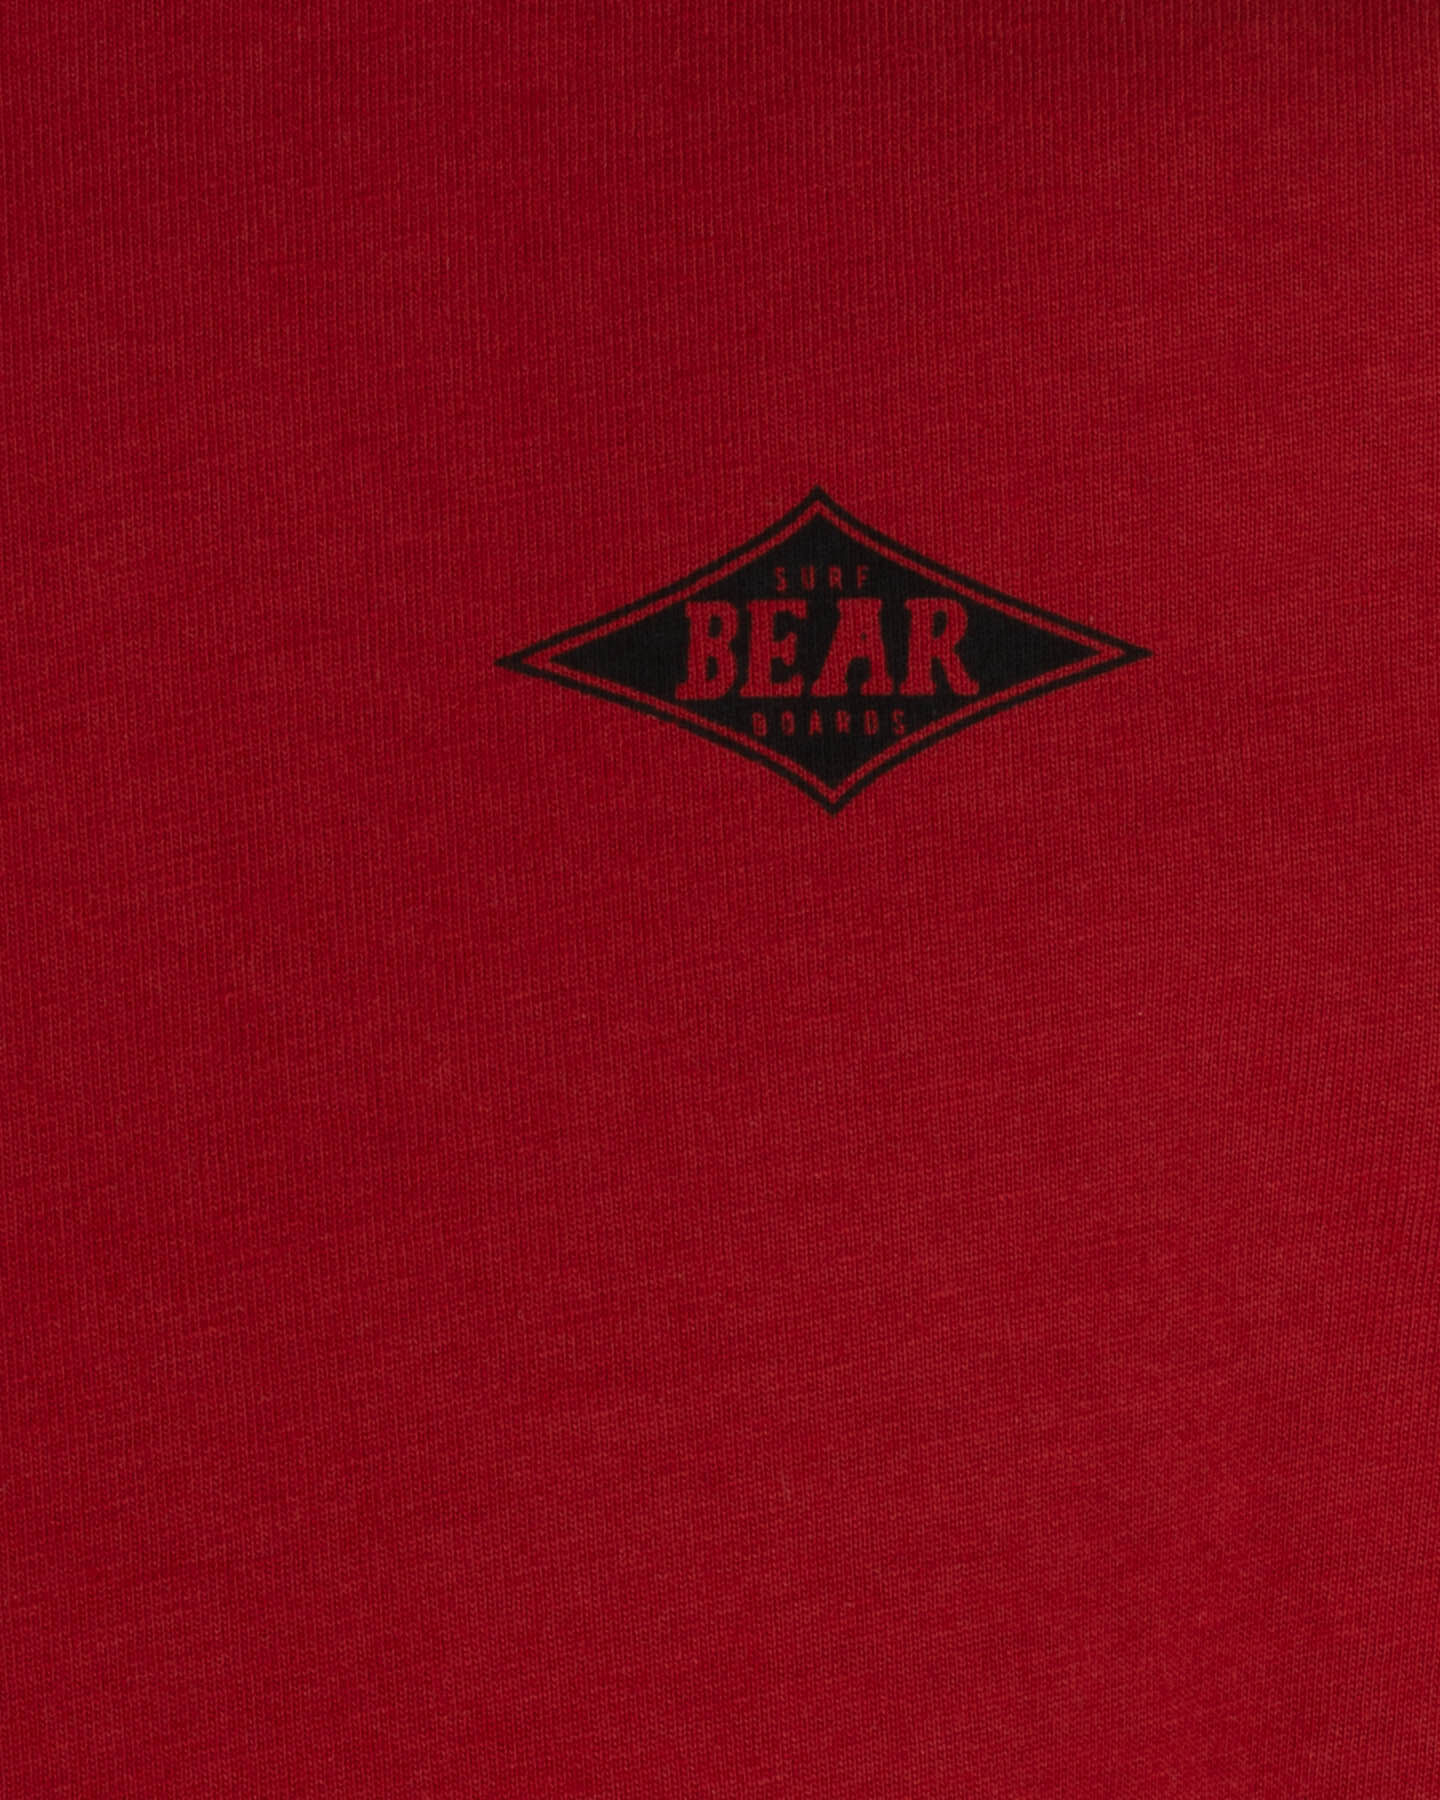  T-Shirt BEAR ICONIC JR S4108747|857|8 scatto 2